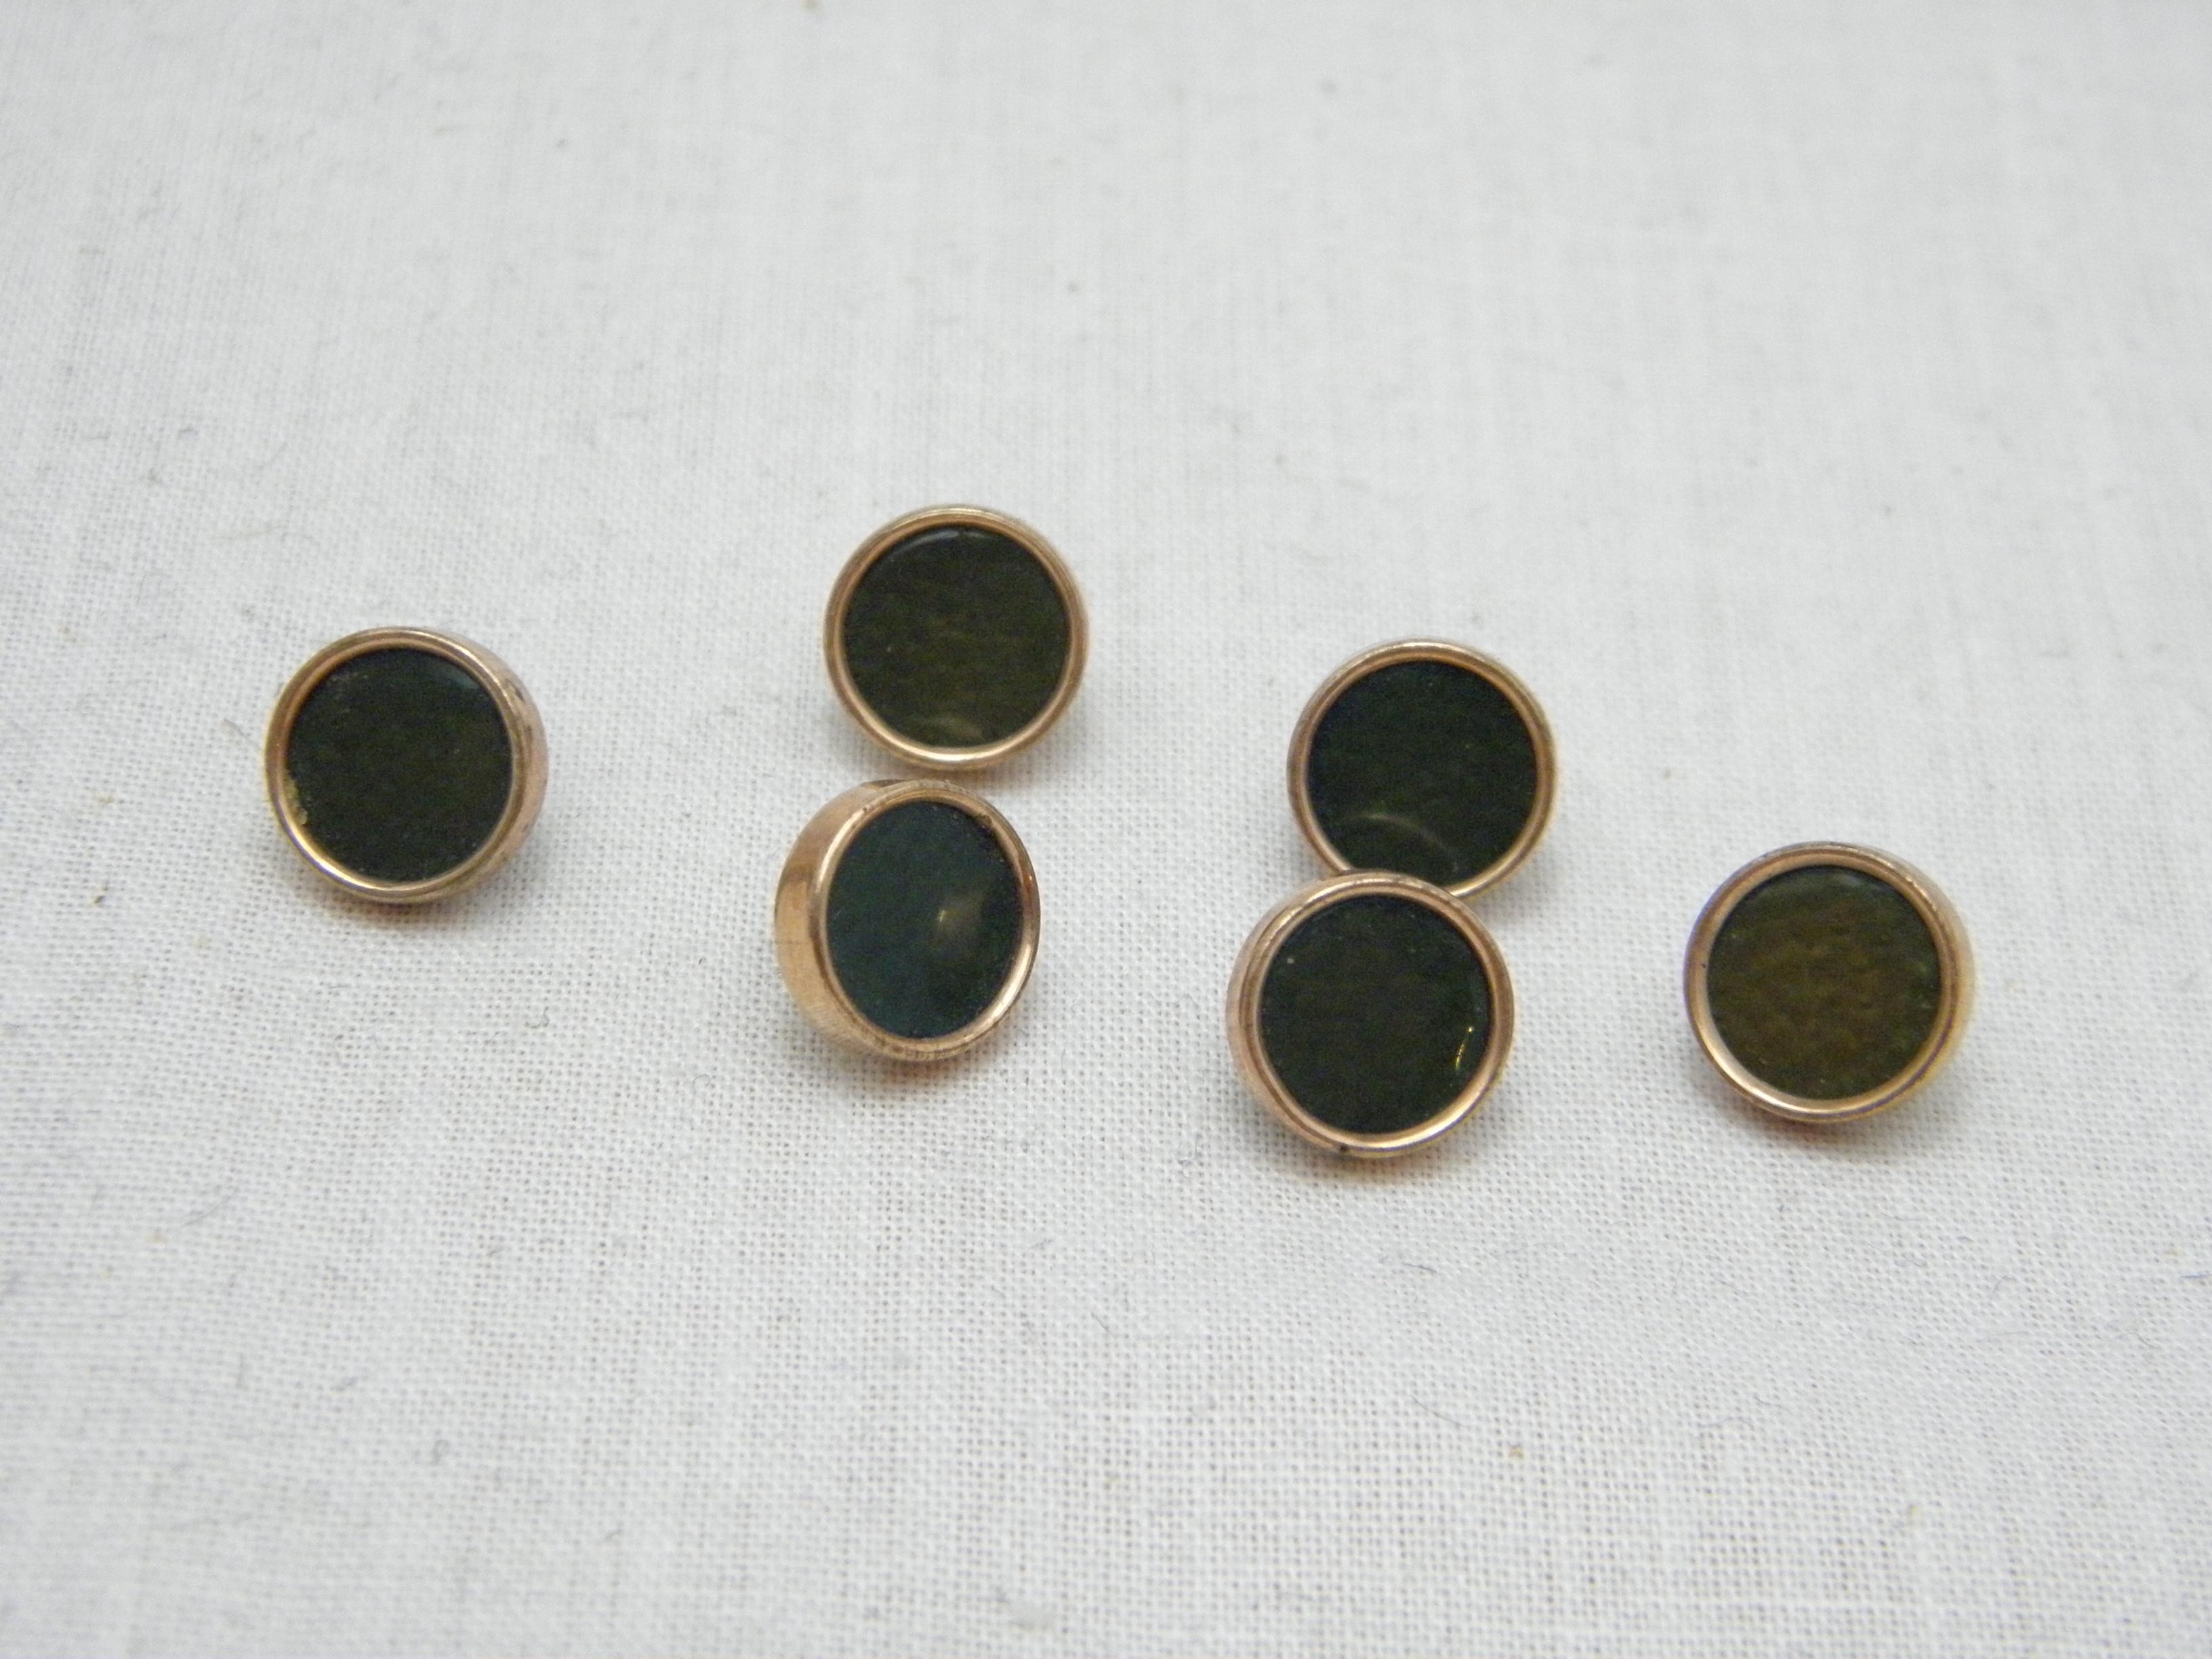 Victorian Bargain Antique 15ct Rose Gold Green Weave Shirt Studs Buttons c1880 625 Purity For Sale